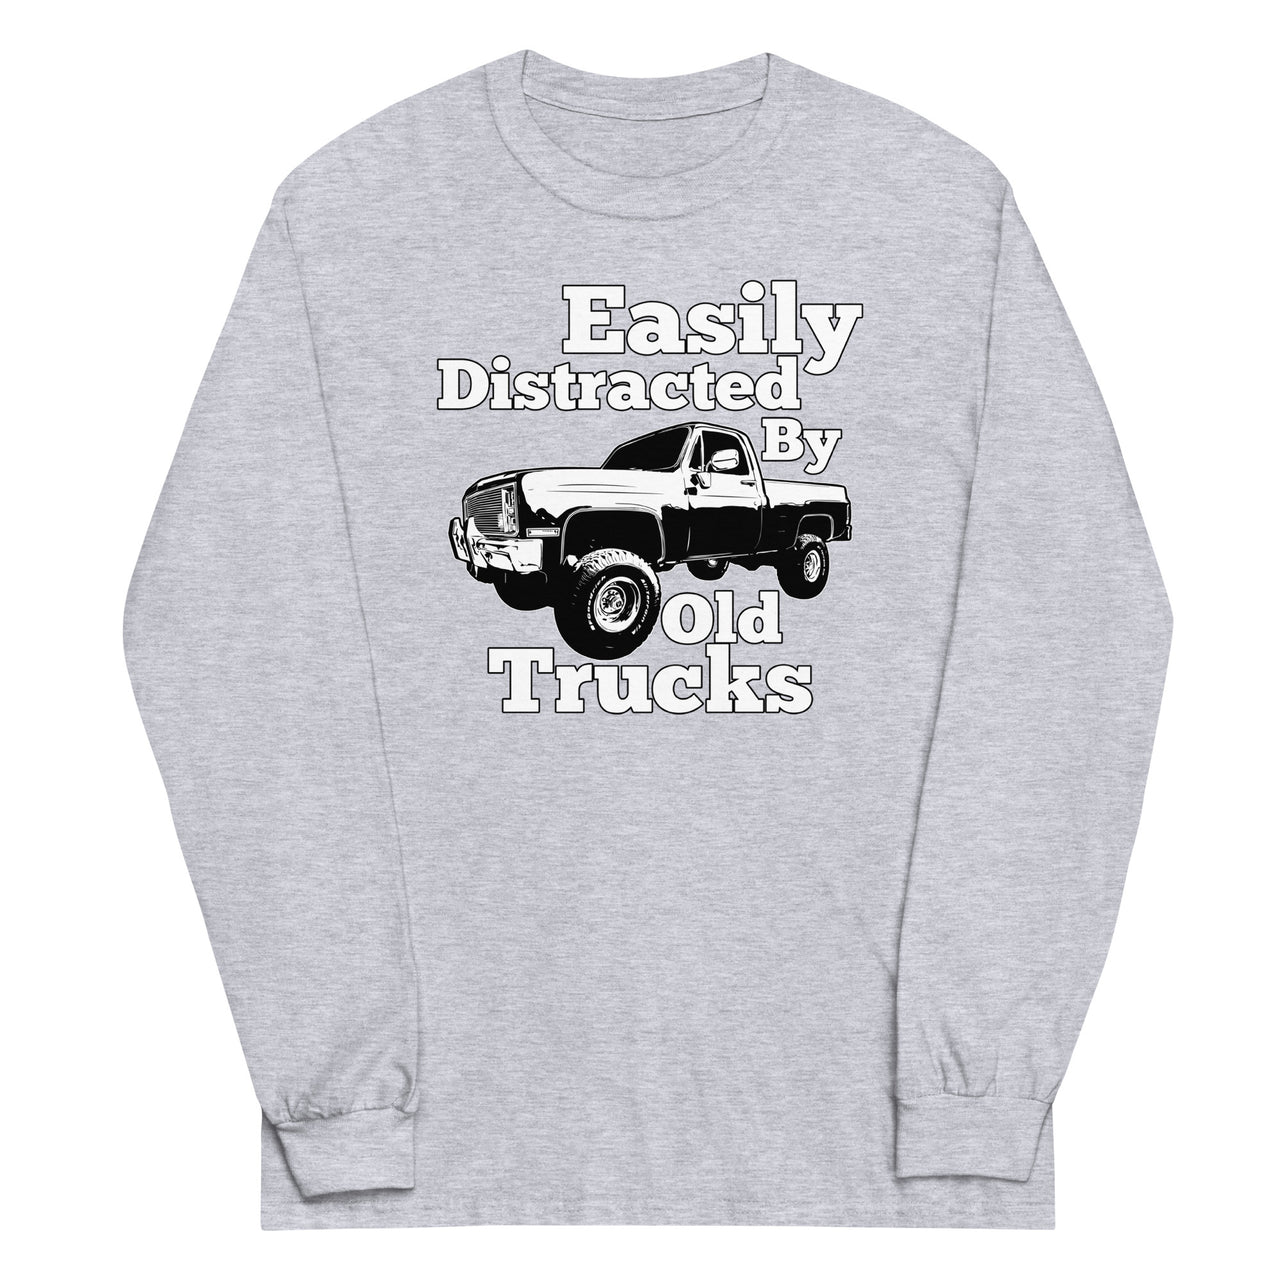 sport grey Square Body Truck Long Sleeve Shirt - Easily Distracted By Old Trucks